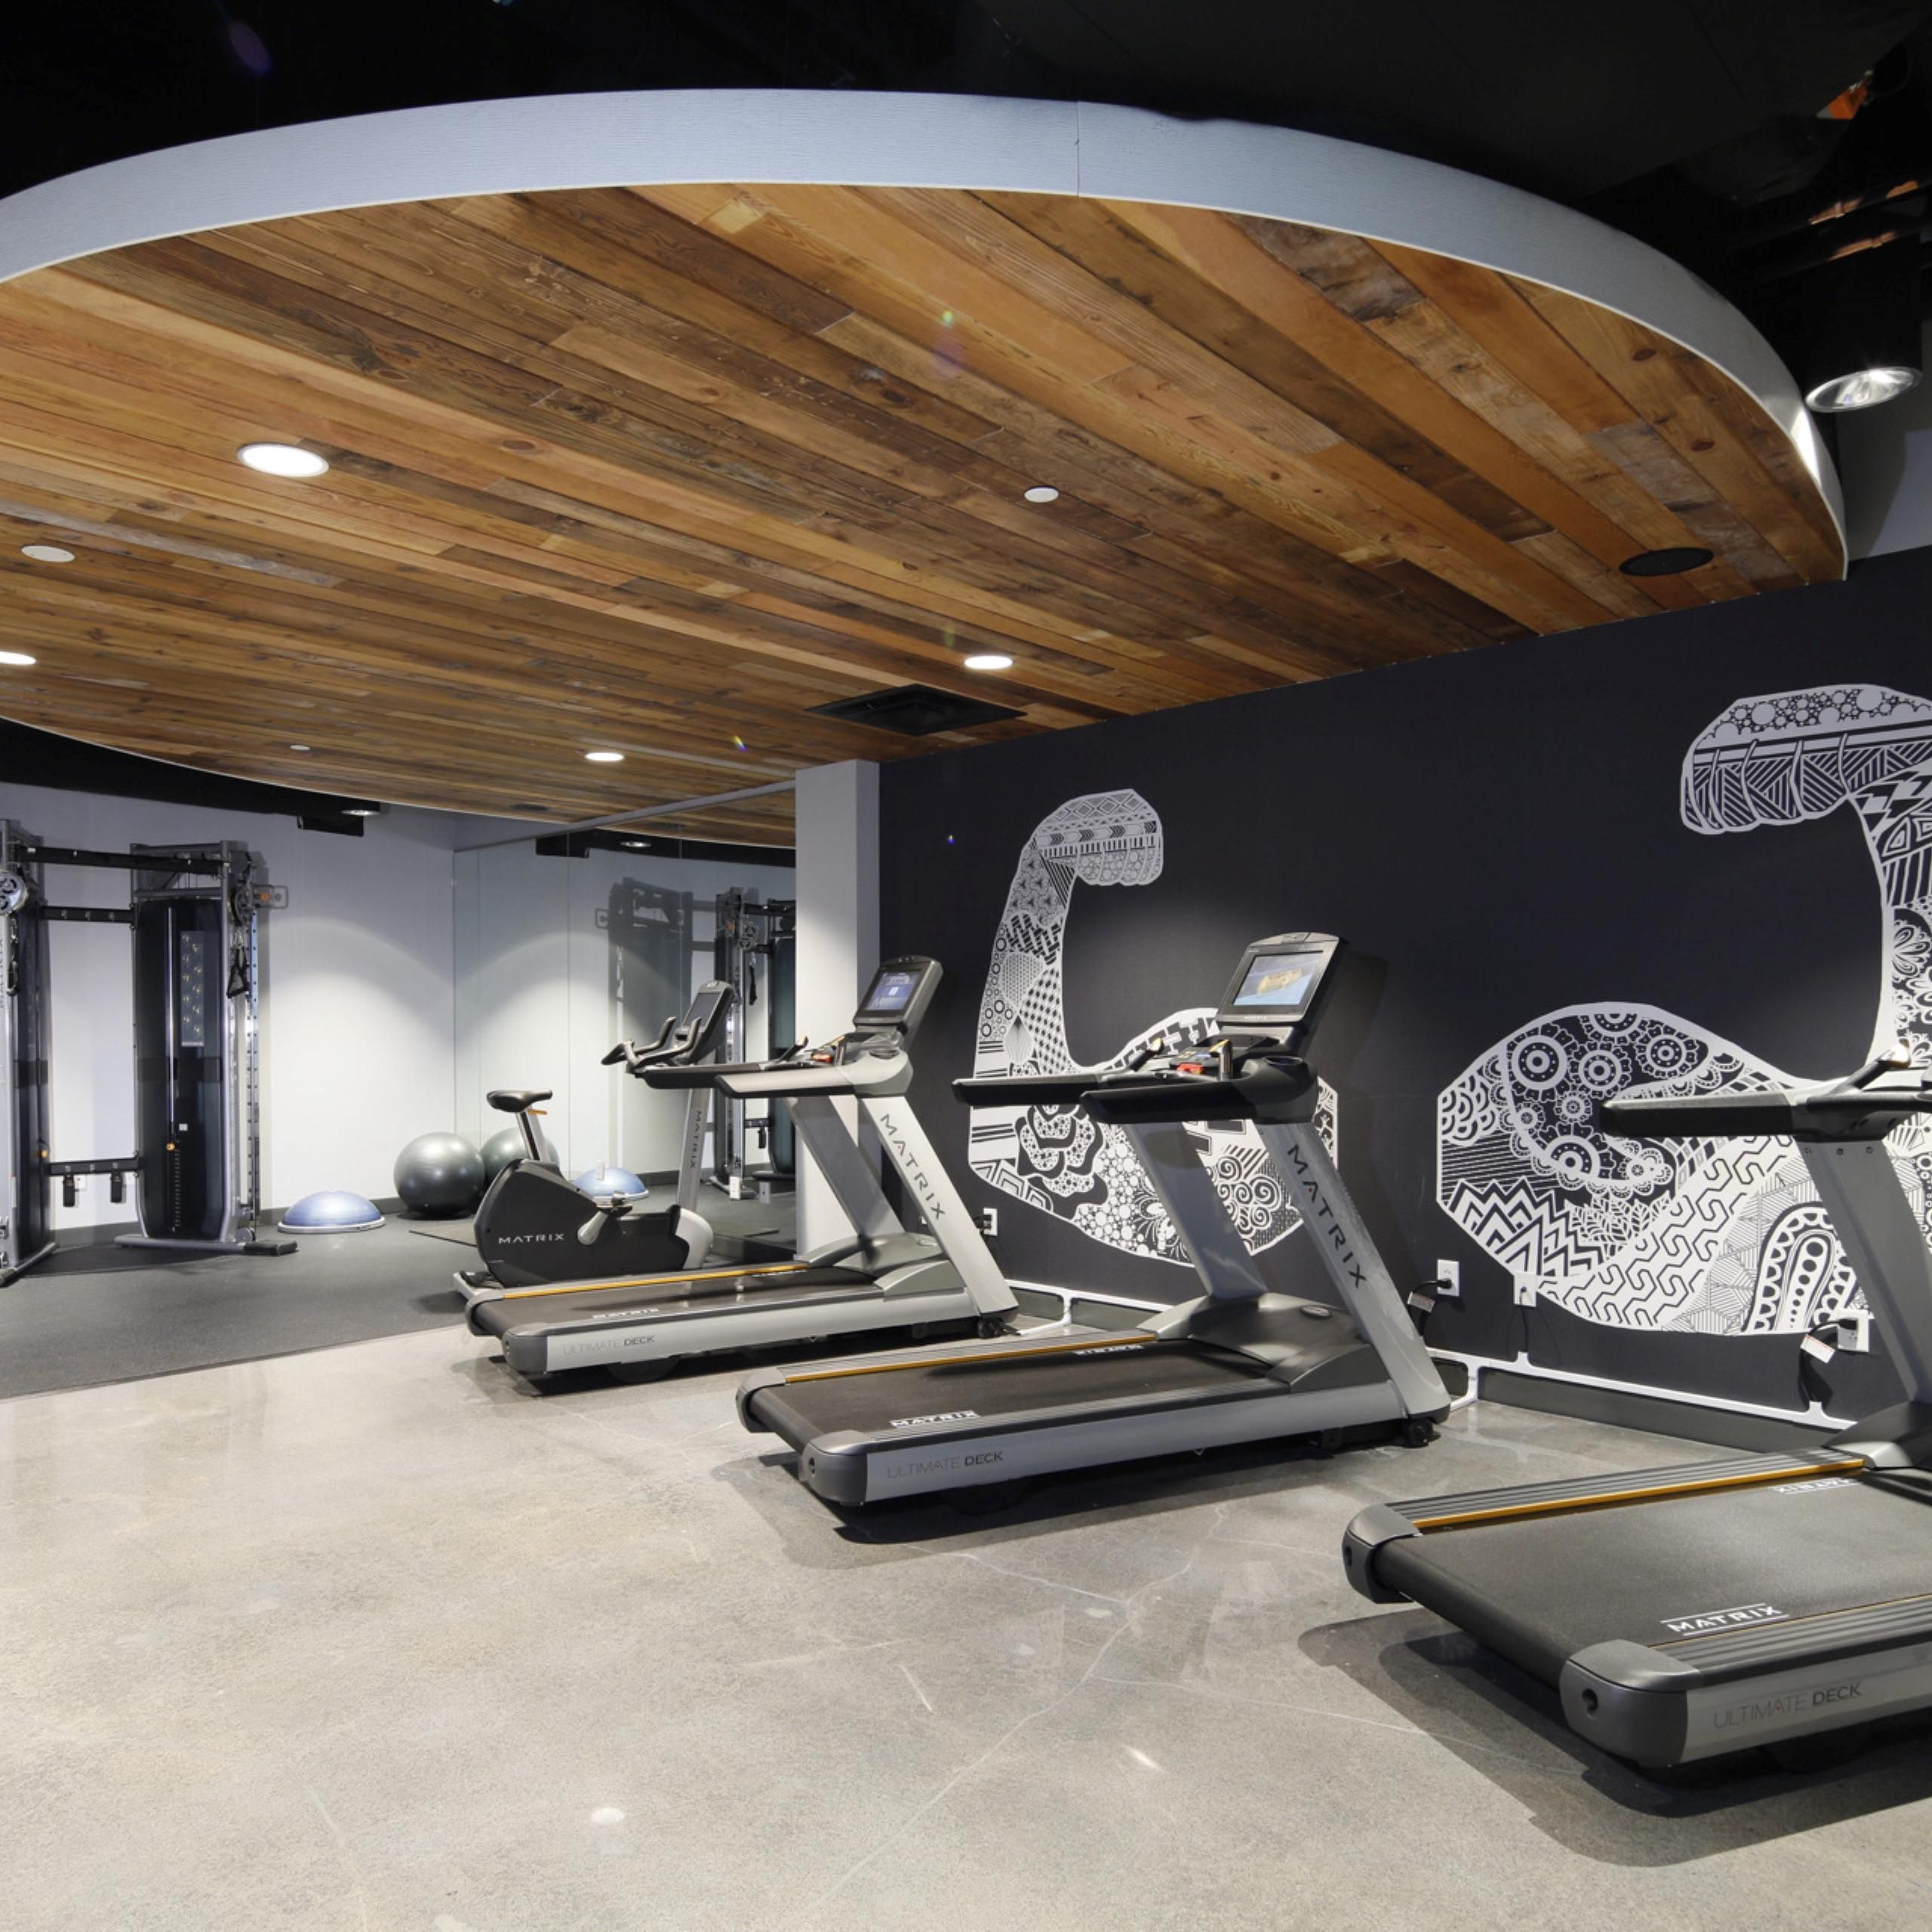 24 Hour Fitness Center with Echelon Fitness Mirror and Bike